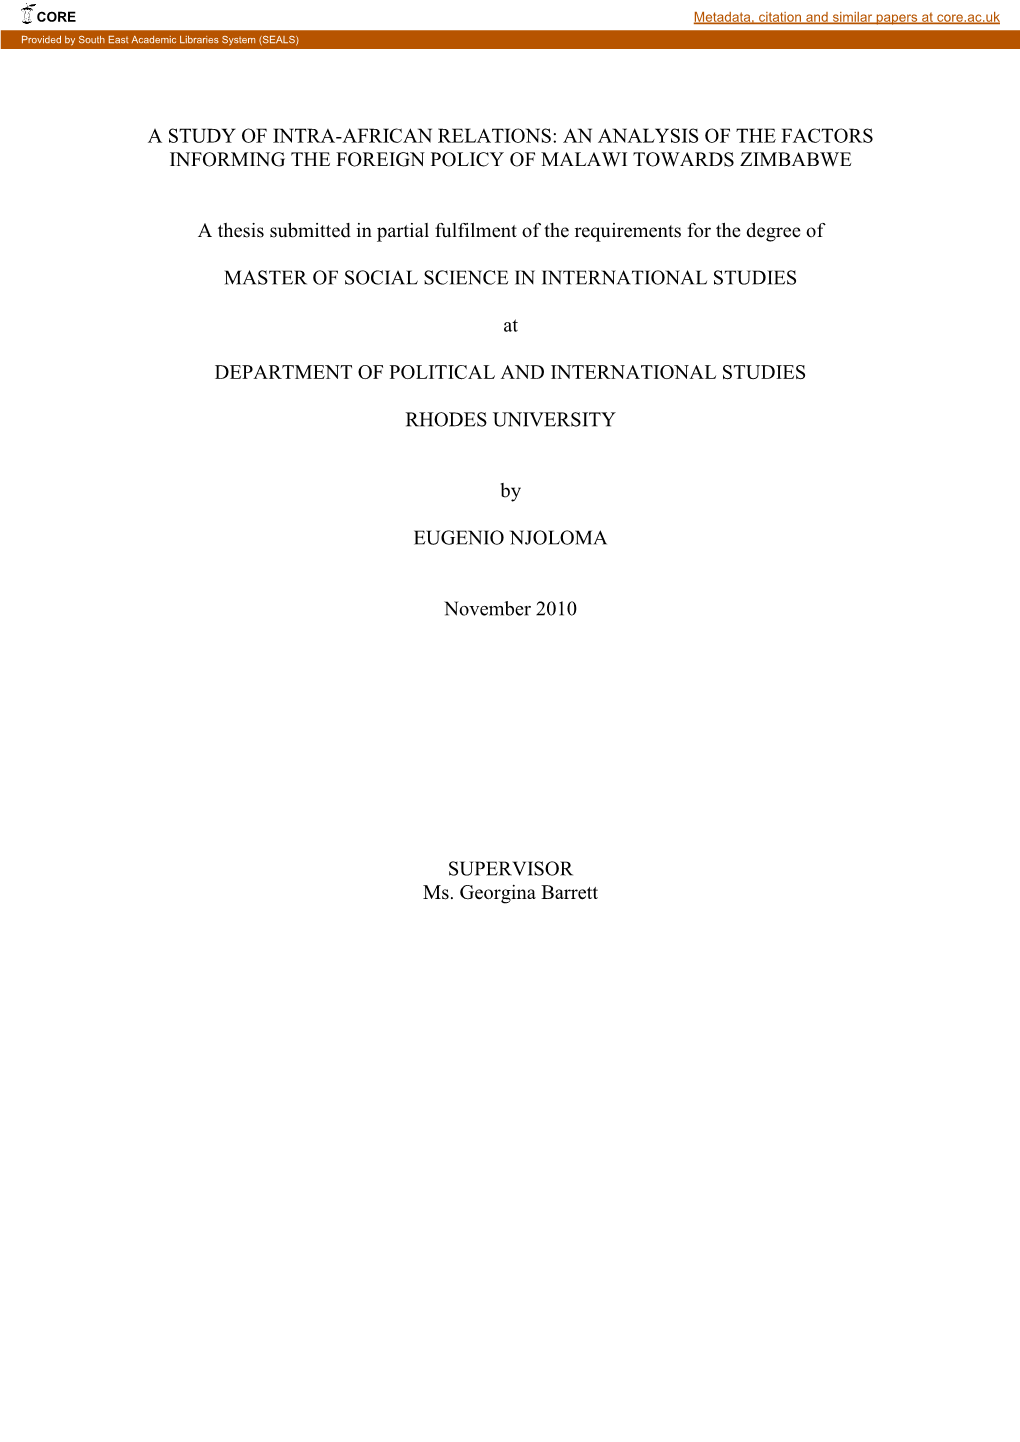 A Study of Intra-African Relations: an Analysis of the Factors Informing the Foreign Policy of Malawi Towards Zimbabwe